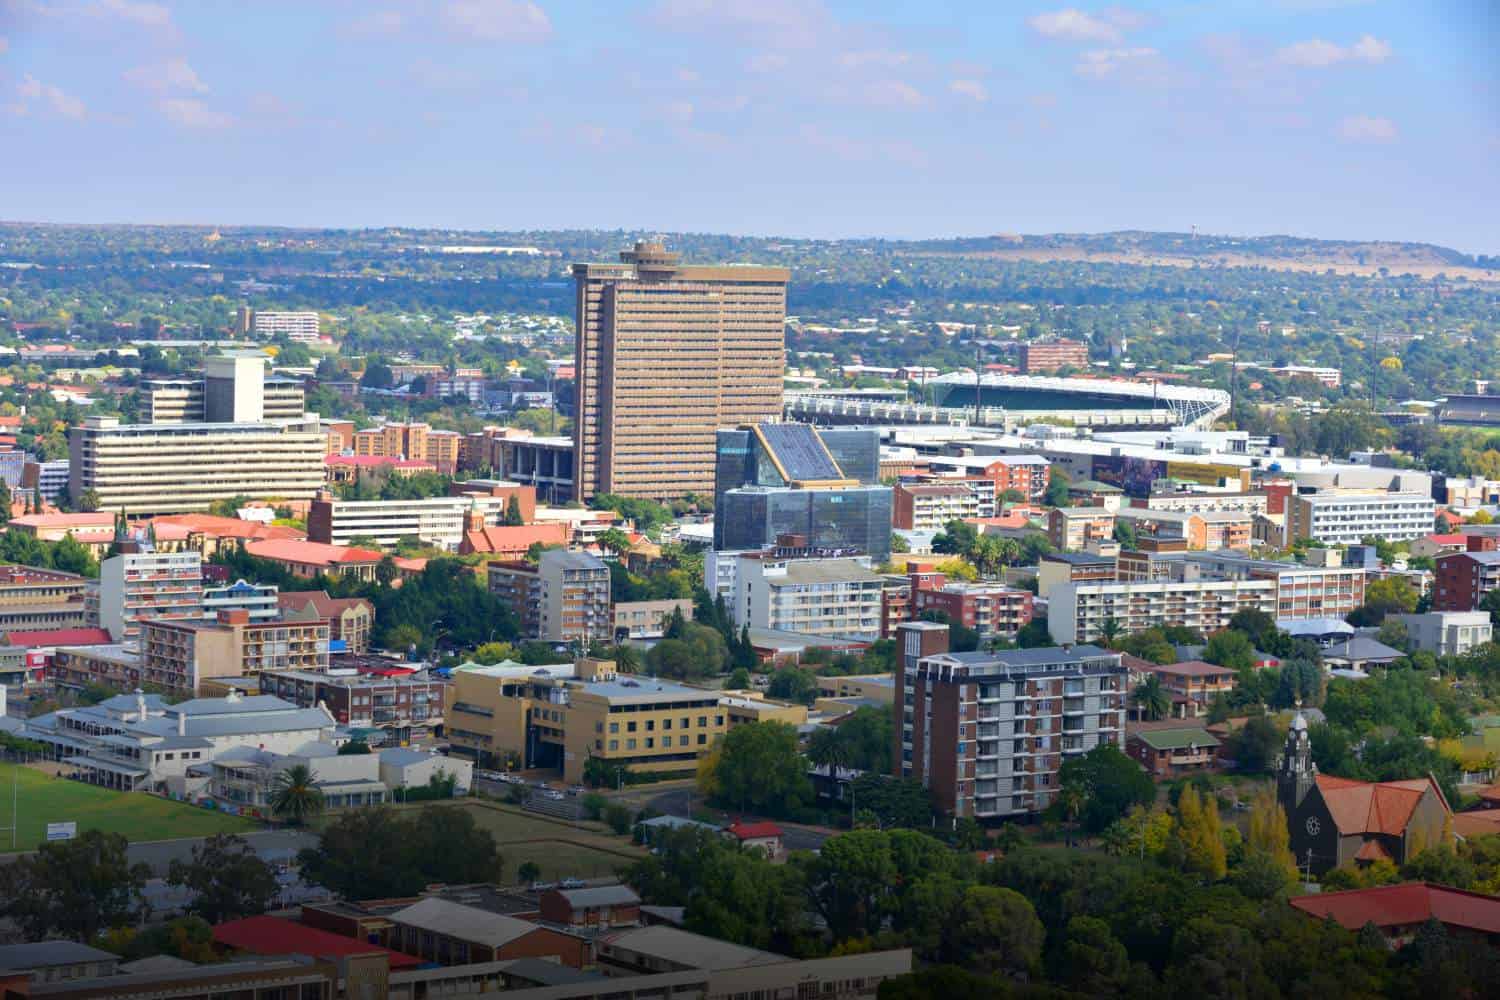 Free State travel guide When to visit, Places to visit, Safety suggestions Bloemfontein